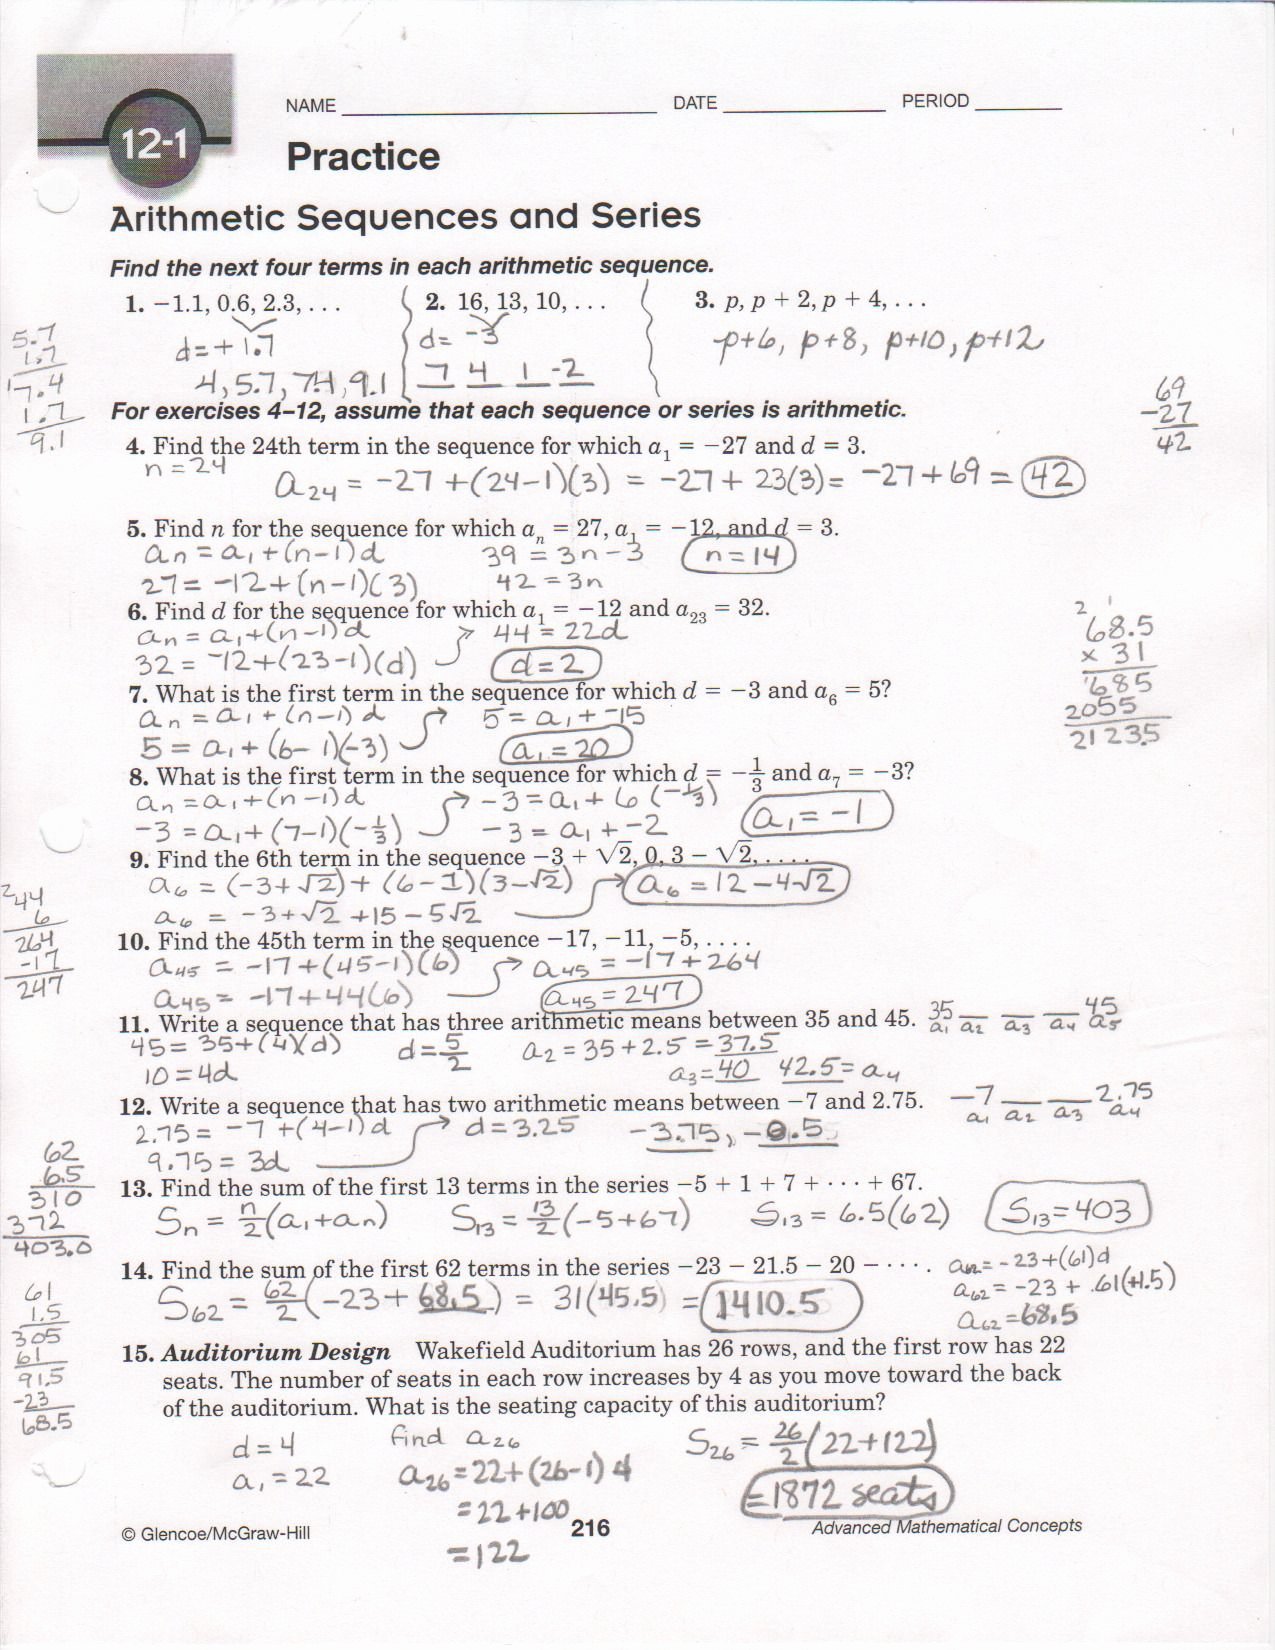 Geometric Sequences Worksheet Answers Luxury Arithmetic Sequences Worksheet 1 Answer Key